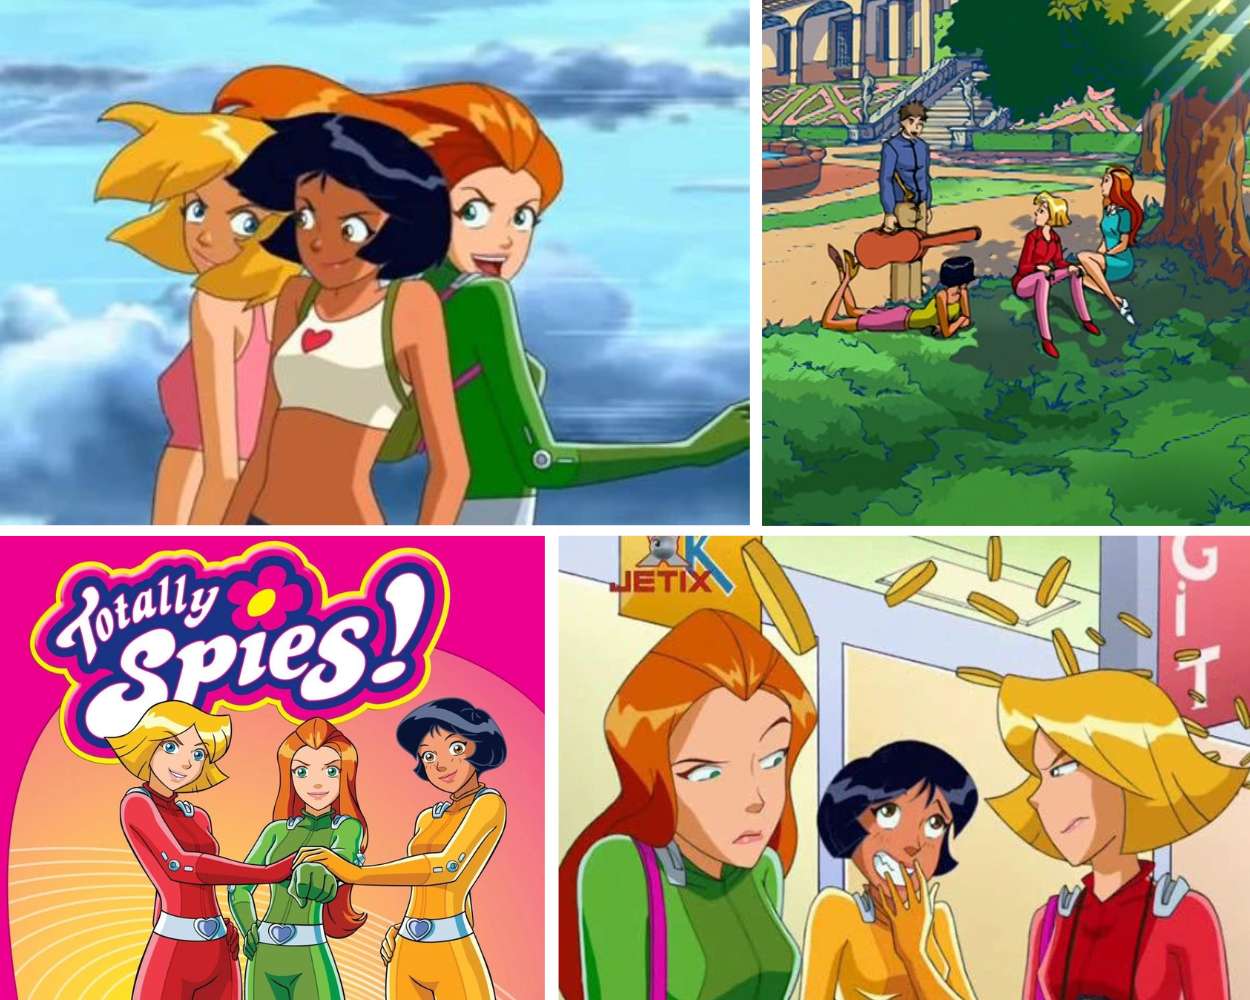 Totally Spies - 2001